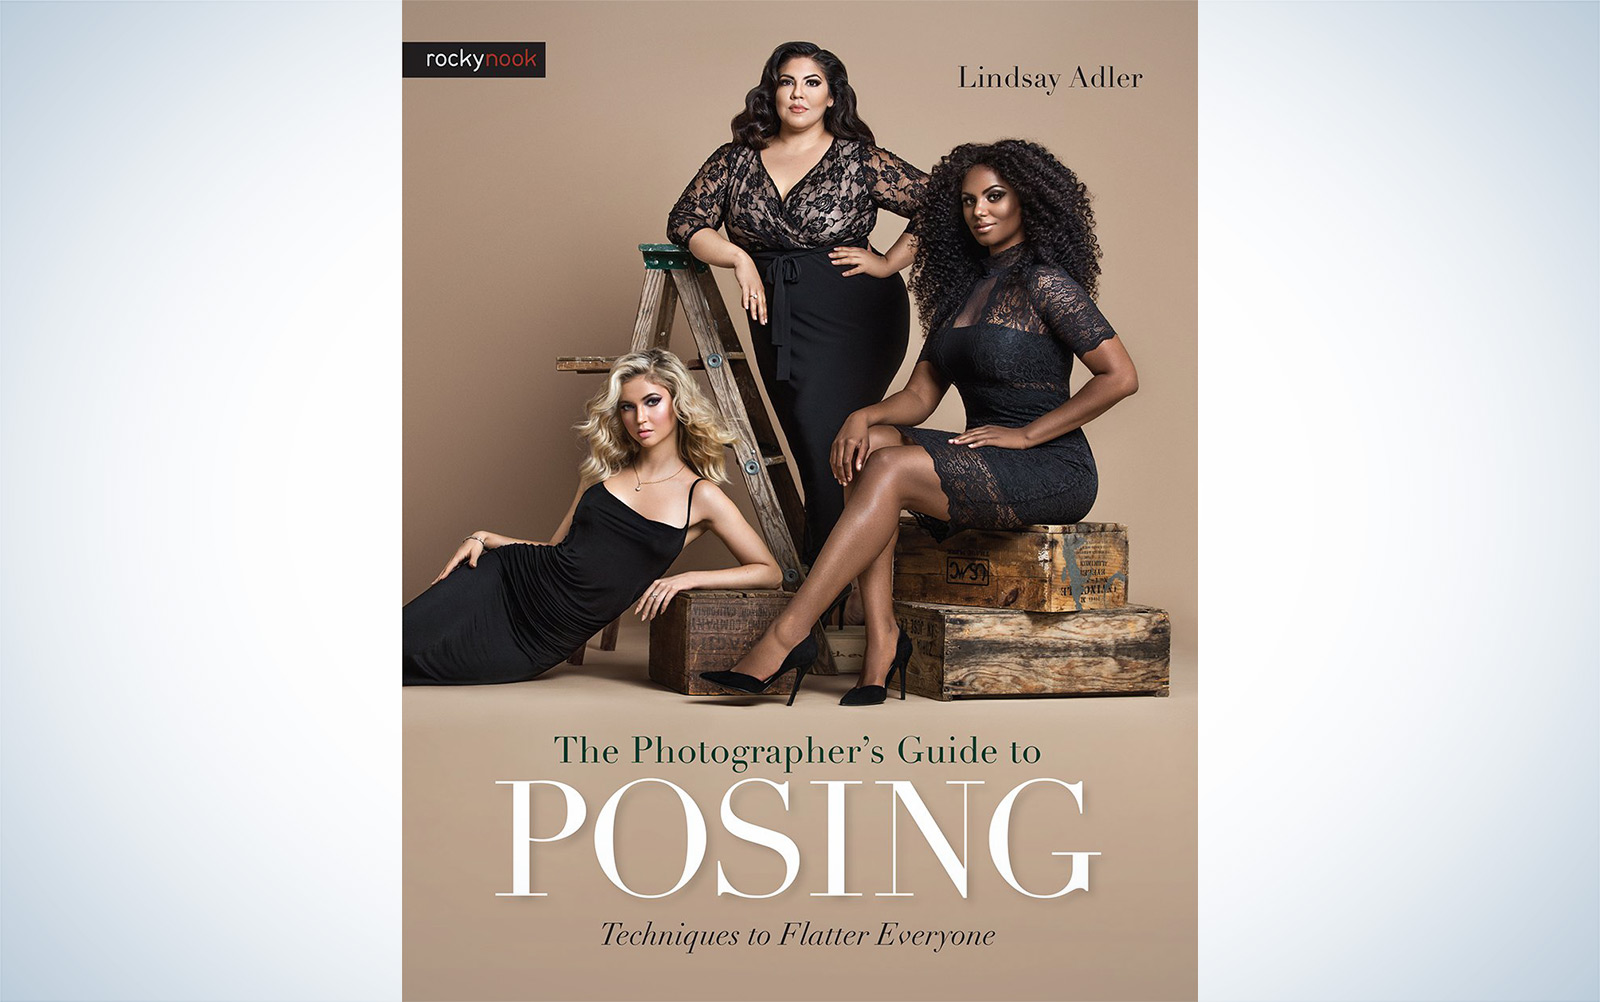 The cover of a photography book titled The Photographer’s Guide to Posing: Techniques to Flatter Everyone